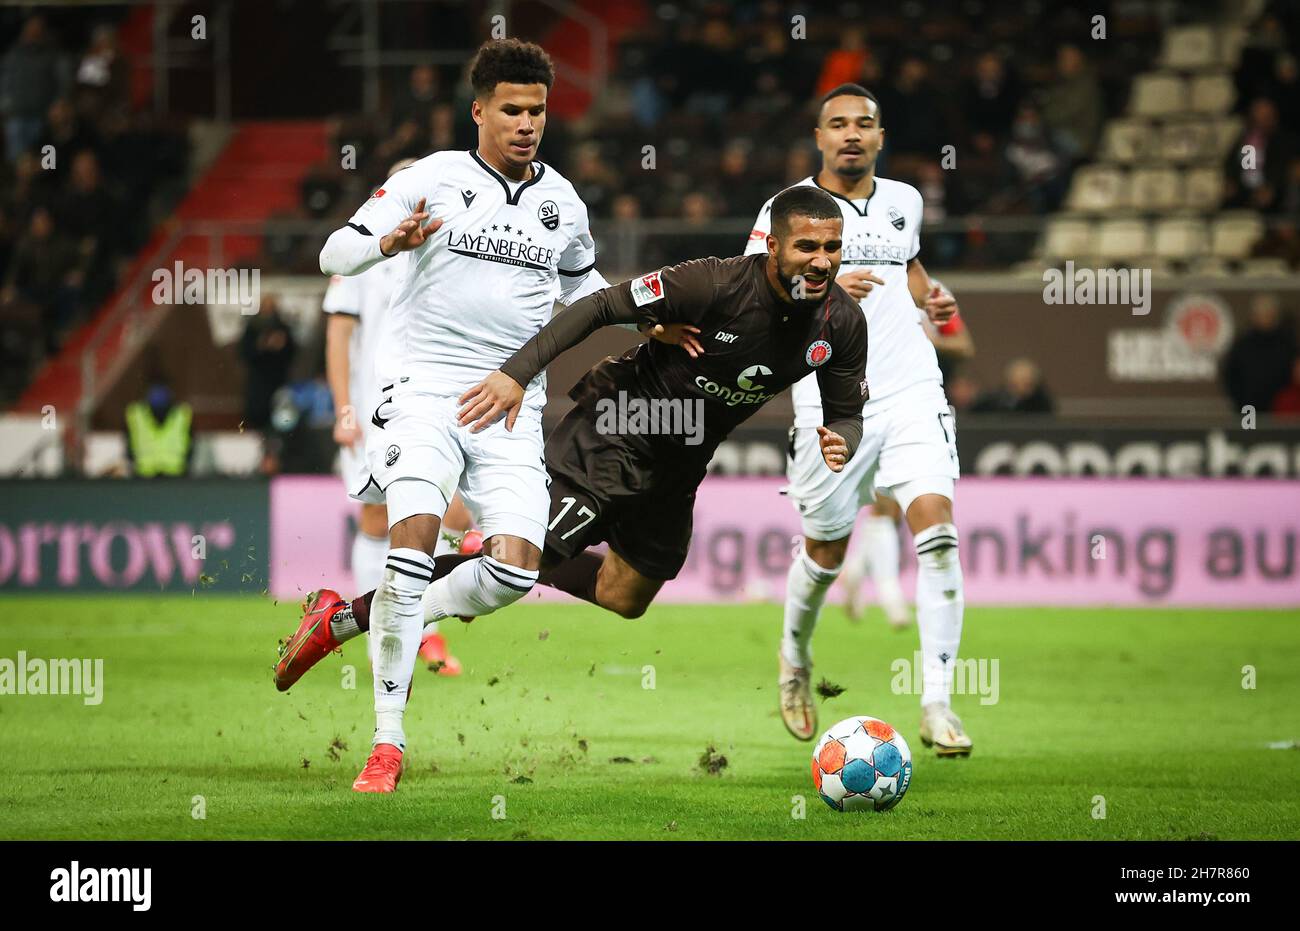 Hamburg, Germany. 24th Nov, 2021. Football: 2. Bundesliga, Matchday 13, FC St. Pauli - SV Sandhausen at Millerntor-Stadion. St. Pauli's Daniel-Kofi Kyereh (m) and Sandhausen's Chima Okoroji (l) fight for the ball. Credit: Christian Charisius/dpa - IMPORTANT NOTE: In accordance with the regulations of the DFL Deutsche Fußball Liga and/or the DFB Deutscher Fußball-Bund, it is prohibited to use or have used photographs taken in the stadium and/or of the match in the form of sequence pictures and/or video-like photo series./dpa/Alamy Live News Stock Photo